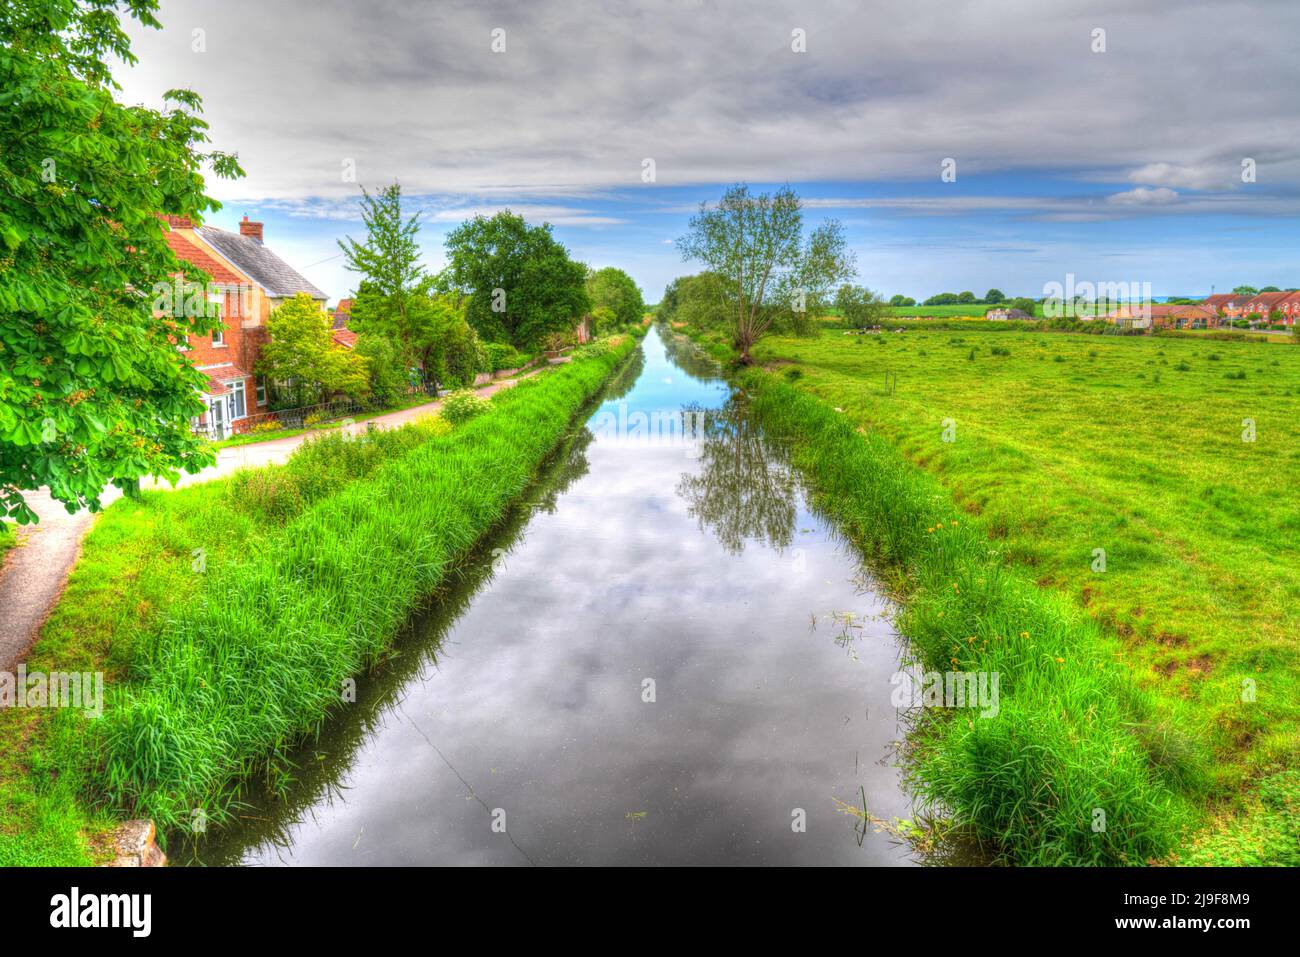 Canal in west country Bridgwater and Taunton English waterway with trees UK Stock Photo